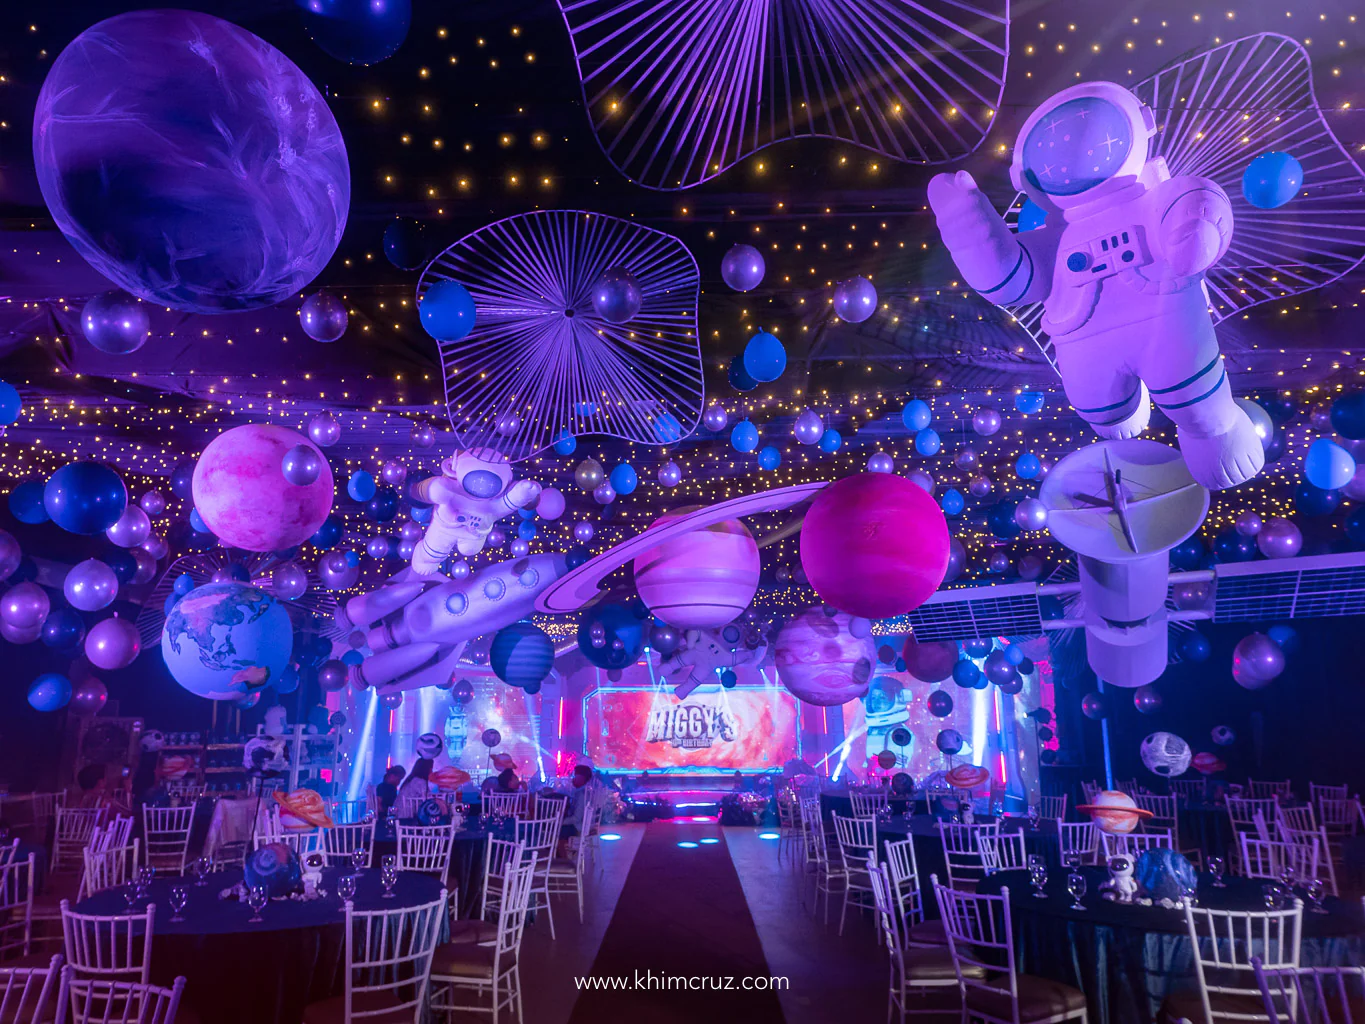 Interstellar space-themed birthday party planets astronauts rockets in the galaxy